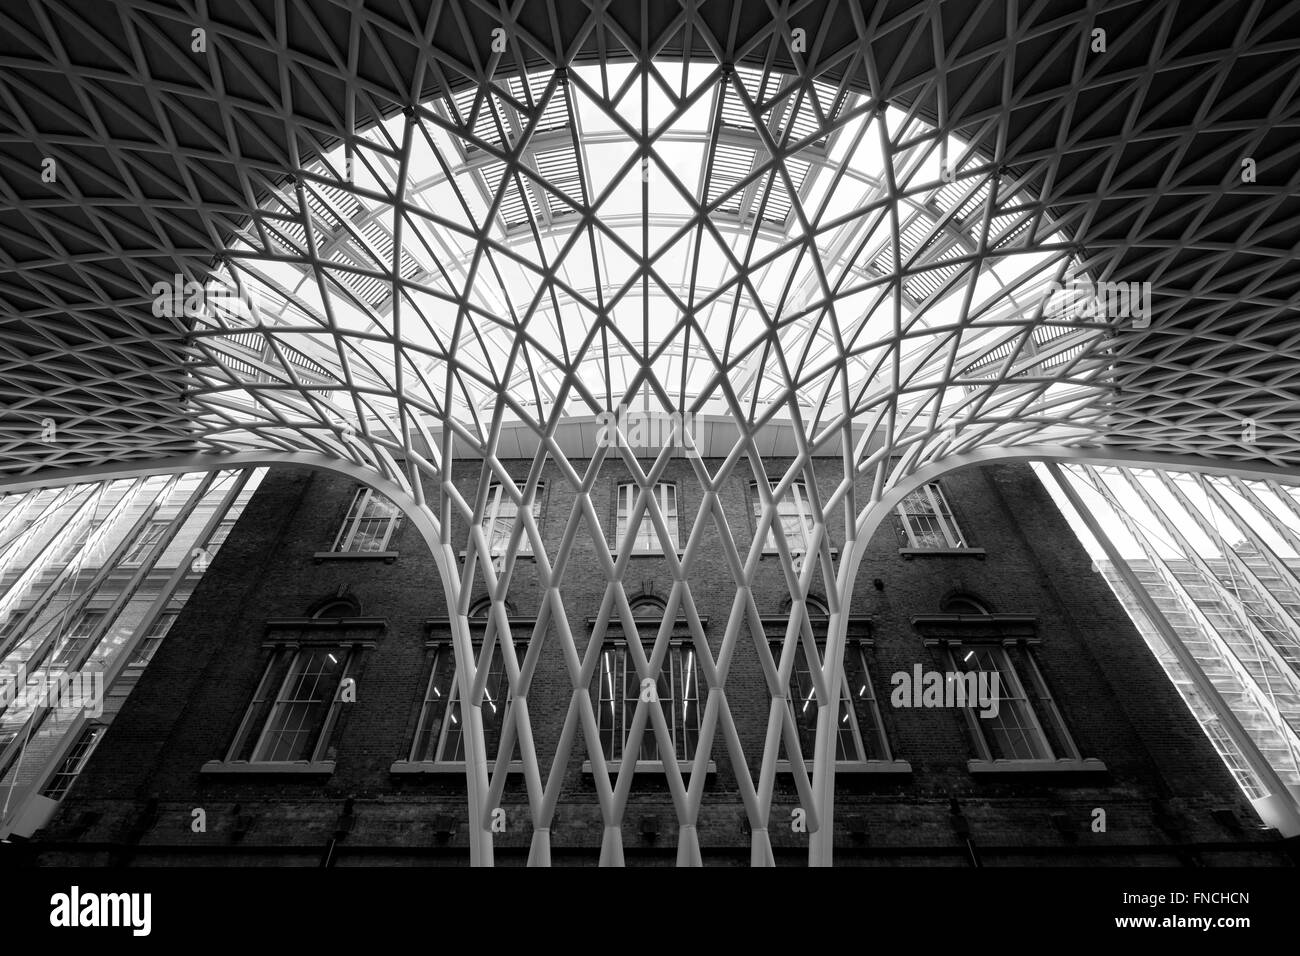 The complex diagrid shell structure roof of King's Cross station, London, UK, designed by ARUP. Stock Photo